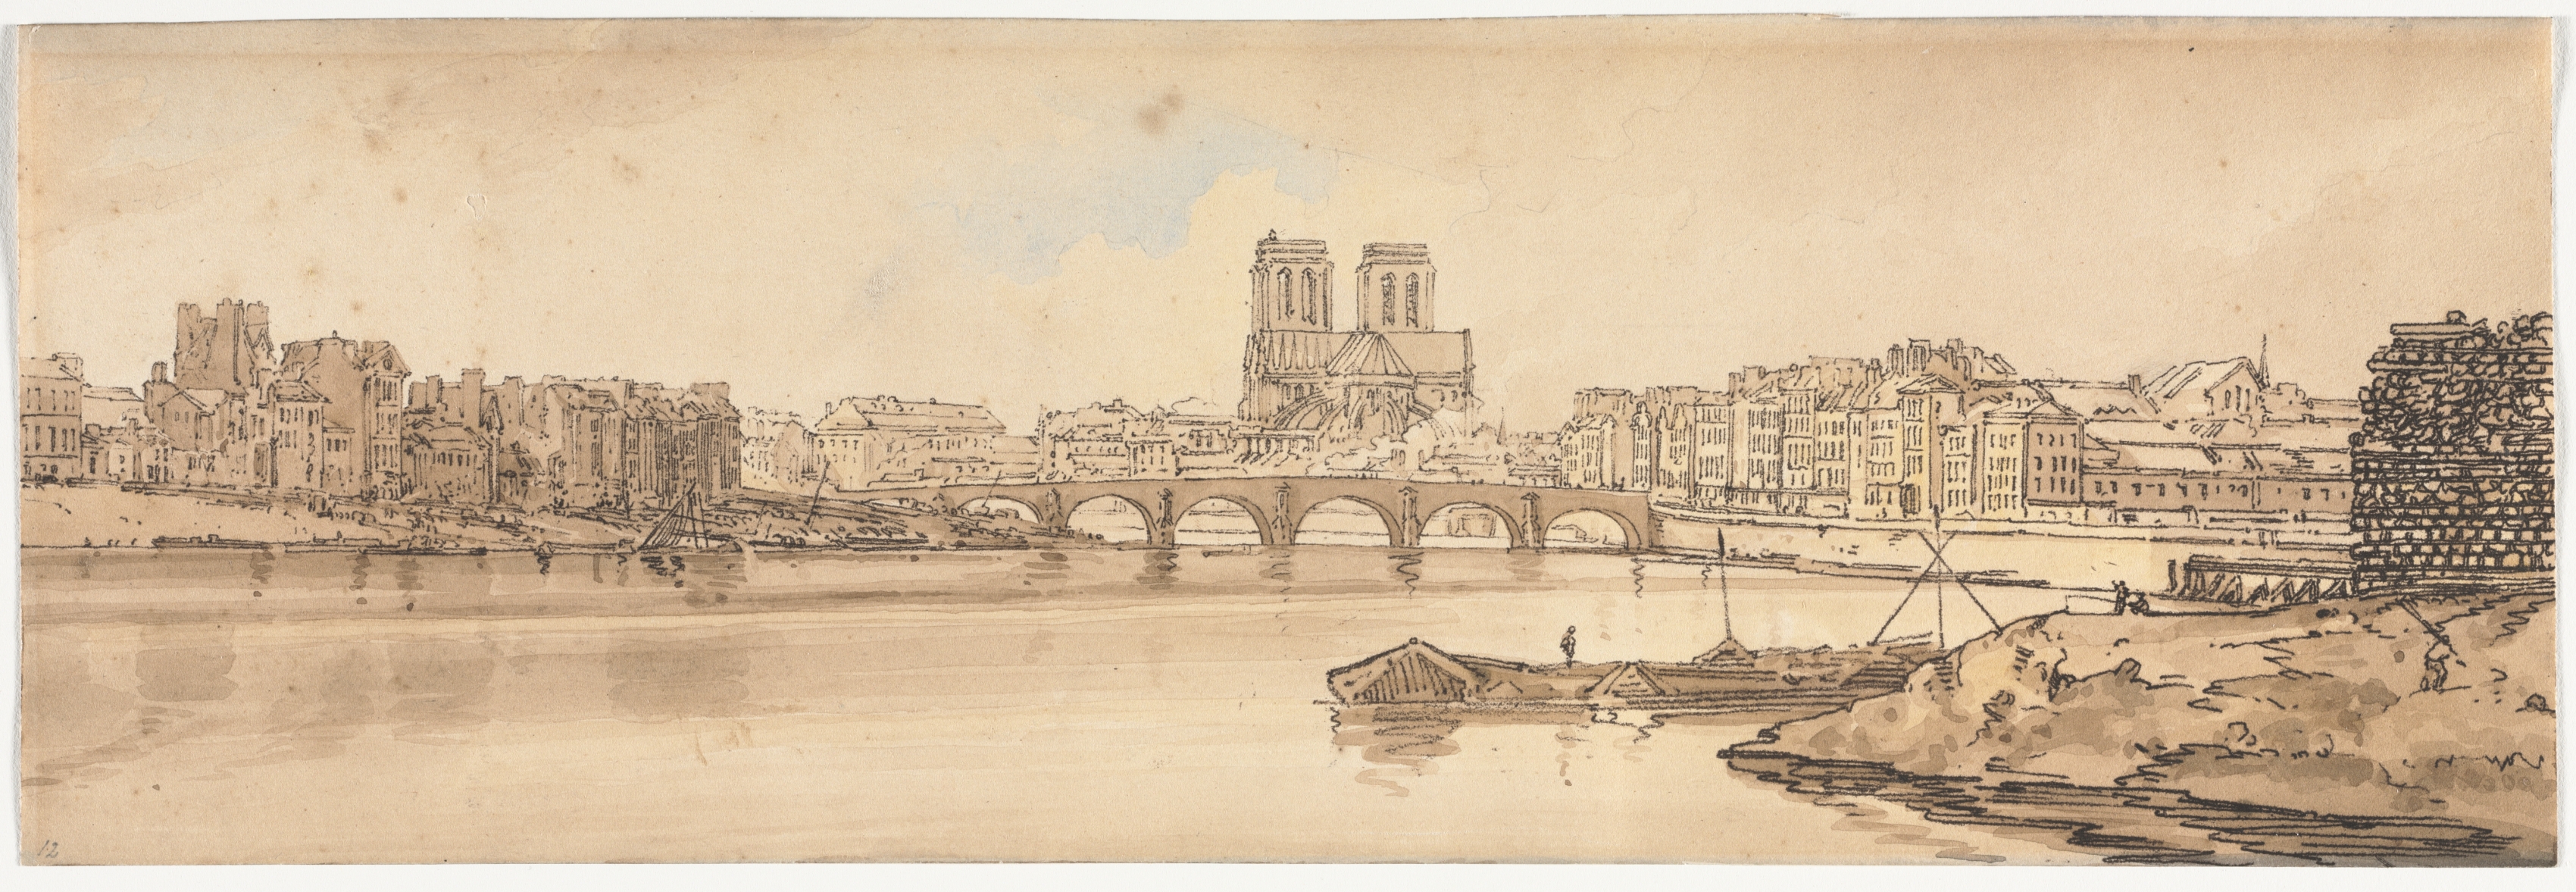 A Selection of Twenty of the Most Picturesque Views in Paris:  View of Pont de la Tournelle and Notre Dame taken from the Arsenal